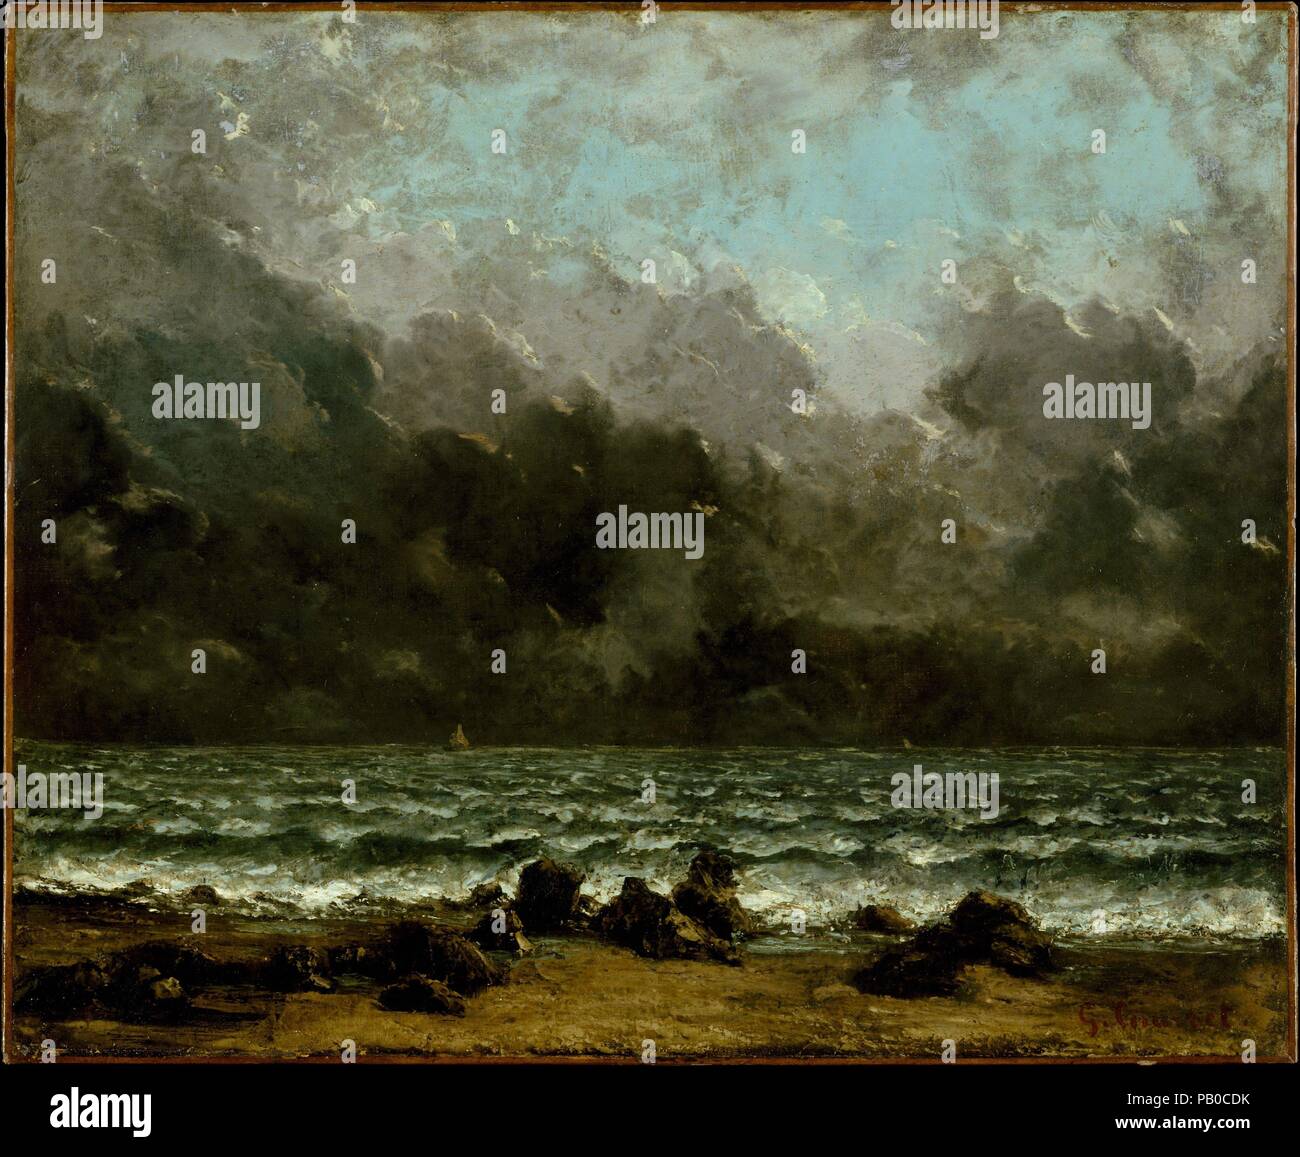 The Sea. Artist: Gustave Courbet (French, Ornans 1819-1877 La Tour-de-Peilz). Dimensions: 20 x 24 in. (50.8 x 61 cm). Date: 1865 or later.  During successive sojourns at Trouville in the mid-1860s, Courbet fully developed the pictorial vocabulary that he used for his distinctive minimalist views of the sea and sky under different conditions of light and weather. This "sea landscape" (<i>paysage de mer</i>), as he called such works, may have been painted along the Normandy coast between 1865 and 1867, or it may be a later studio repetition. Museum: Metropolitan Museum of Art, New York, USA. Stock Photo